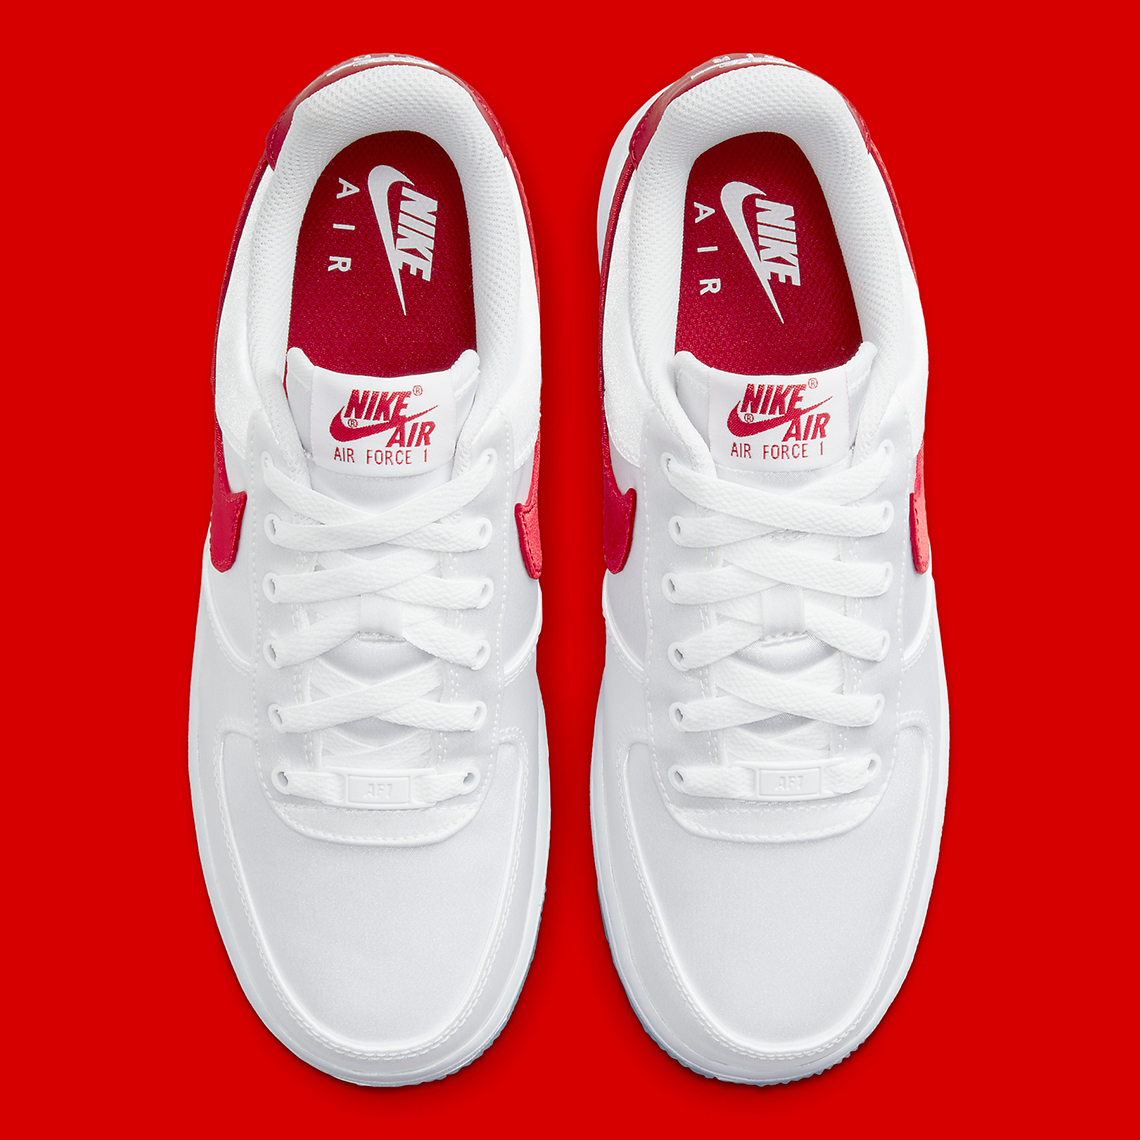 nike LV8 air force 1 low satin white red dx6541 100 1